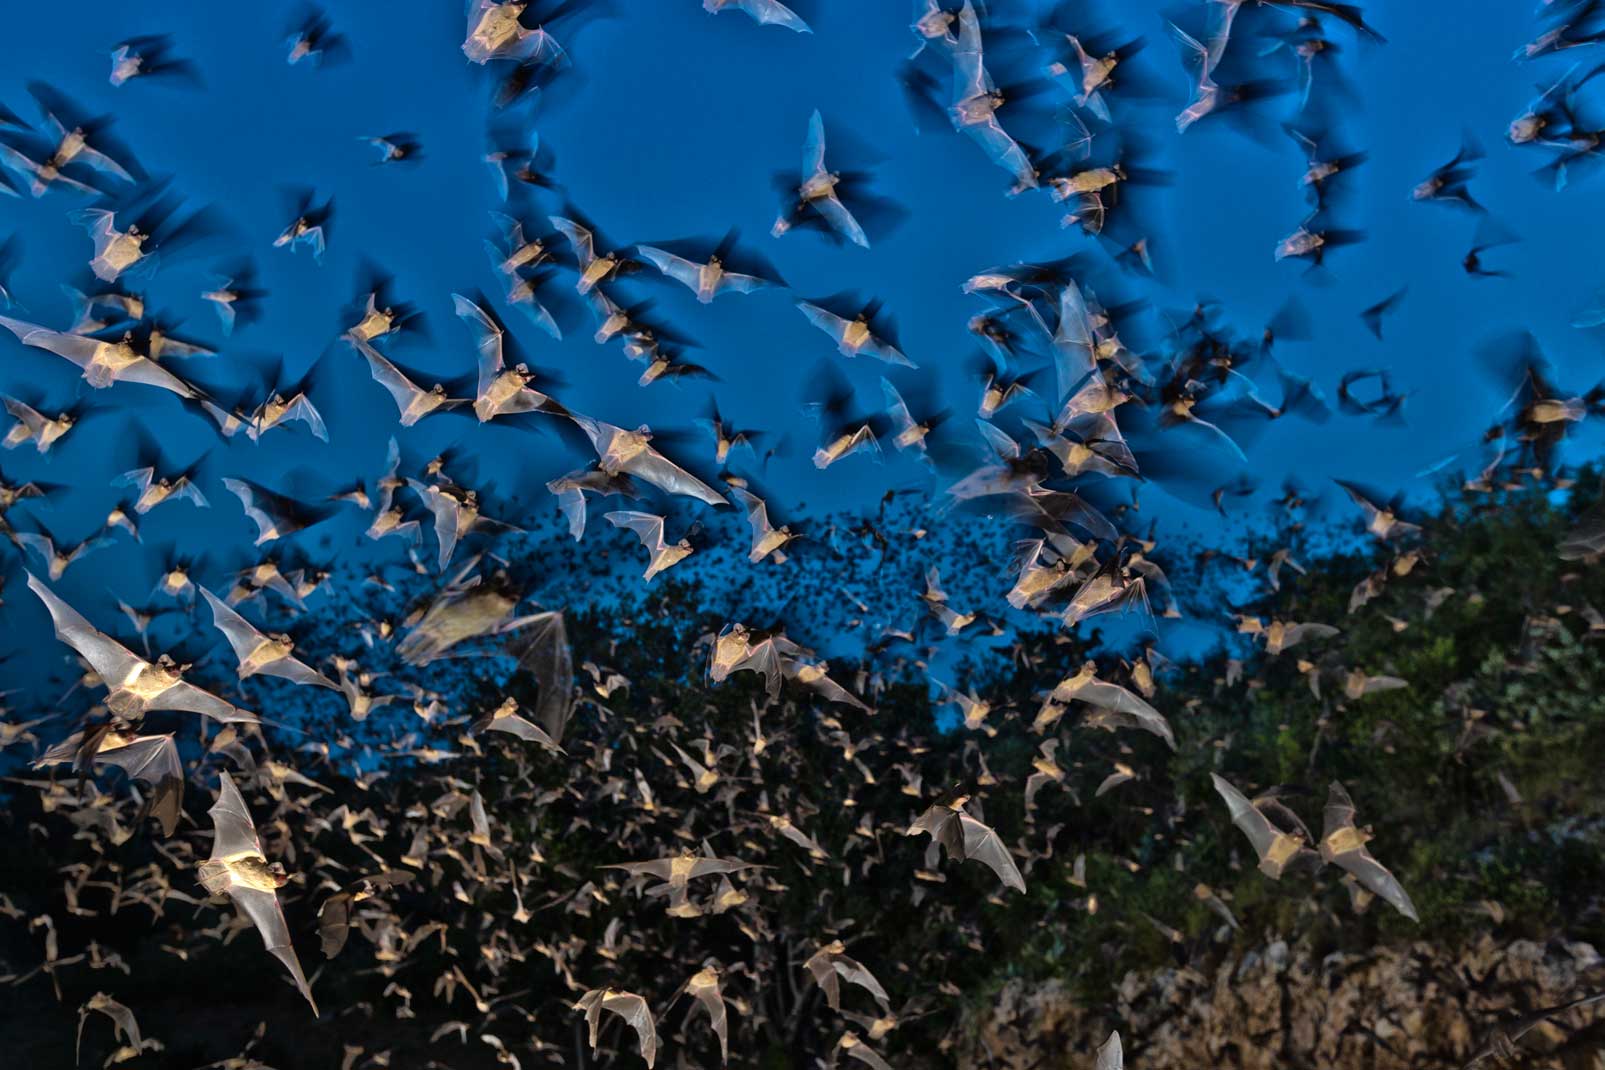 Millions of Mexican free-tailed bats flutter out of The Nature Conservancy’s Eckert James River Bat Cave Preserve, located about 100 miles northwest of San Antonio. The public battle for Bracken Cave elevated the understanding of bats, and their maternity caves, across central Texas.